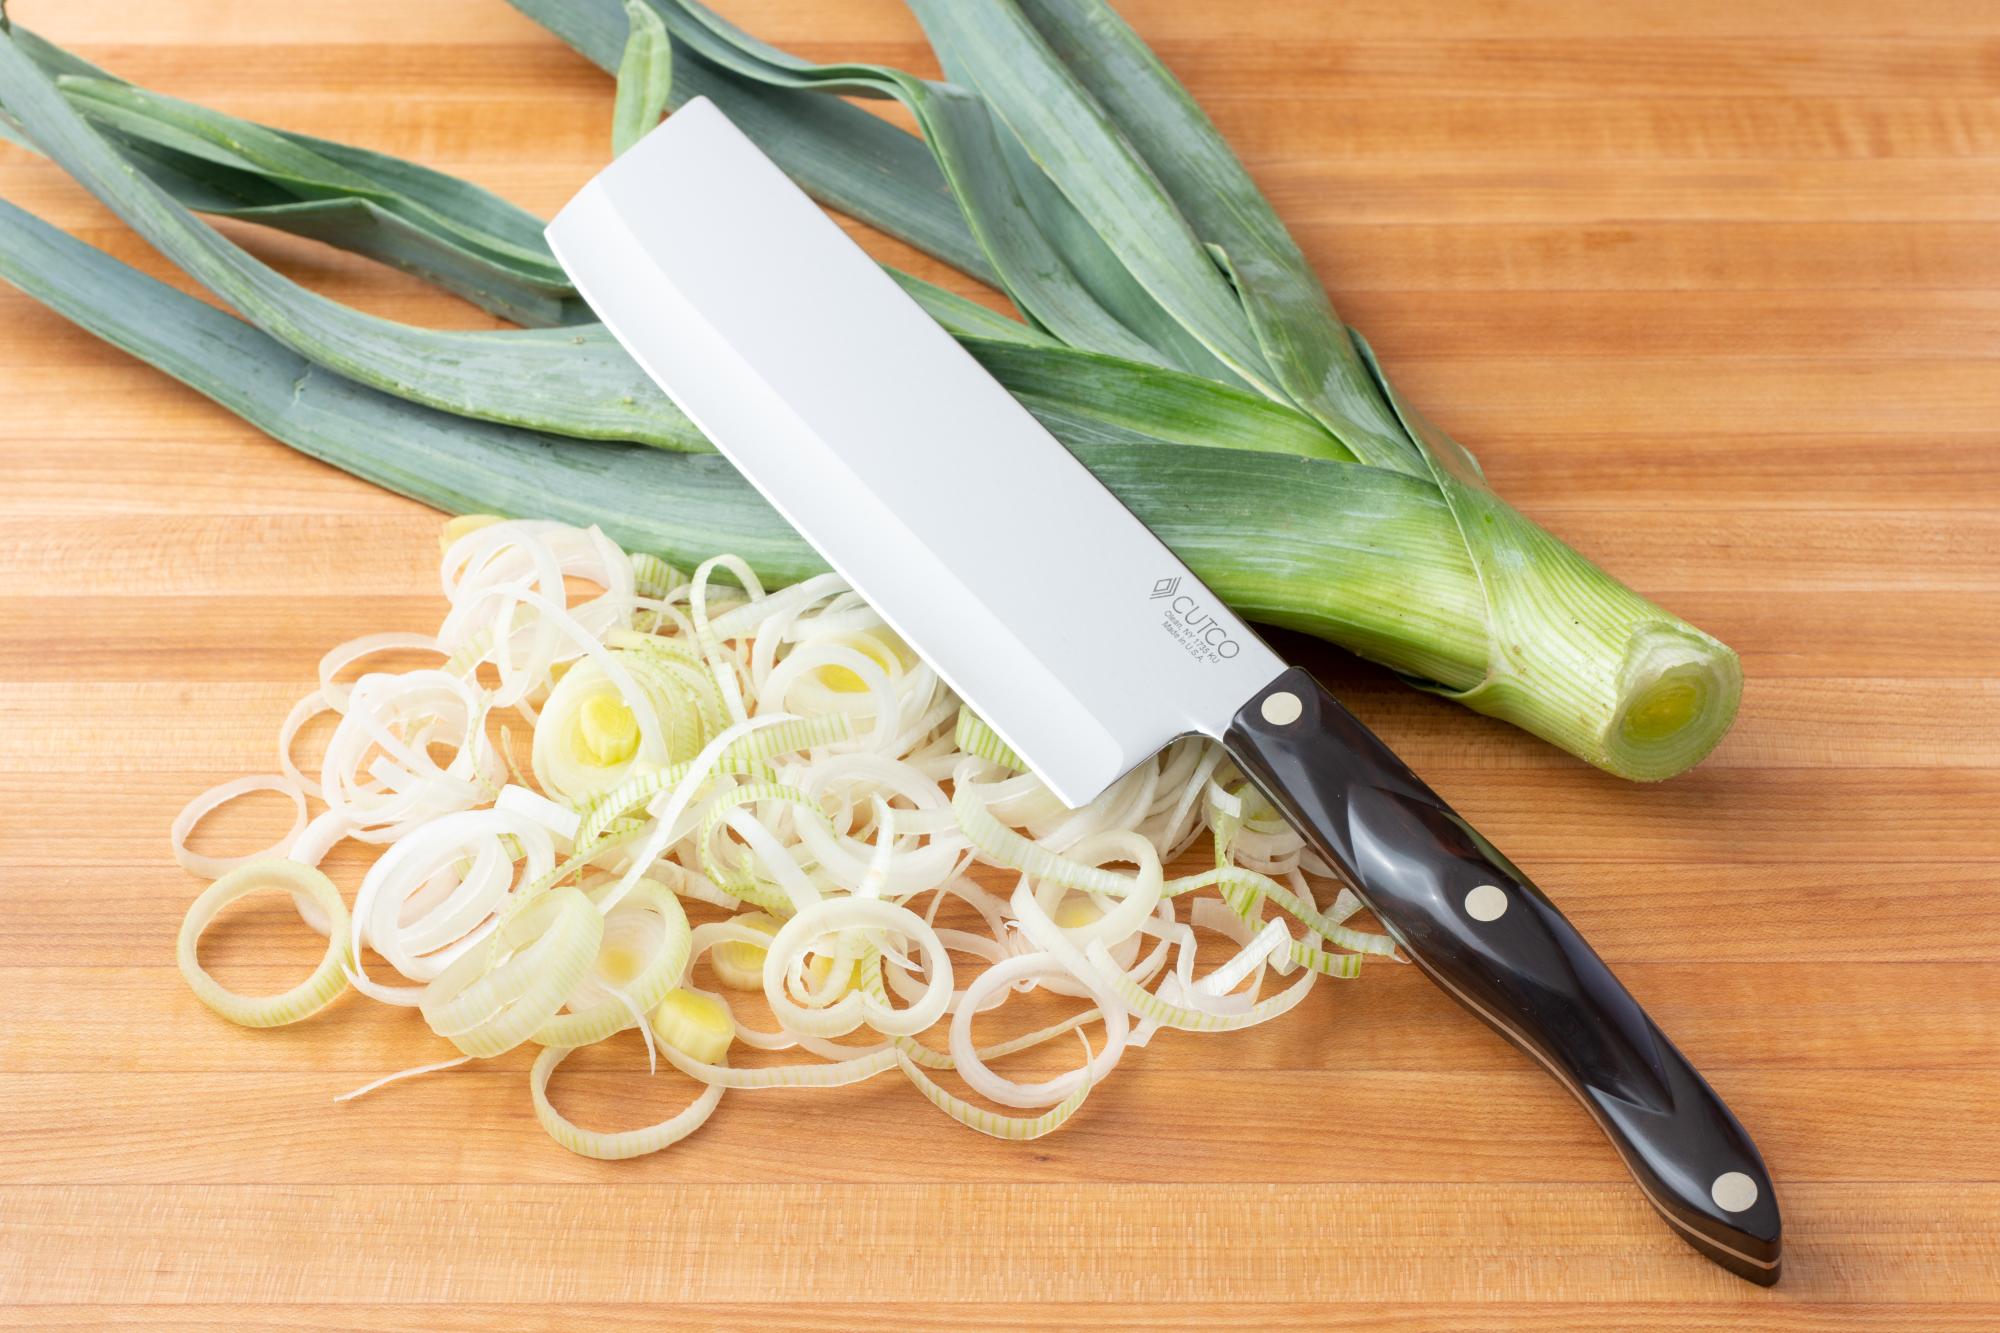 Using the Vegetable Knife to slice the leek.